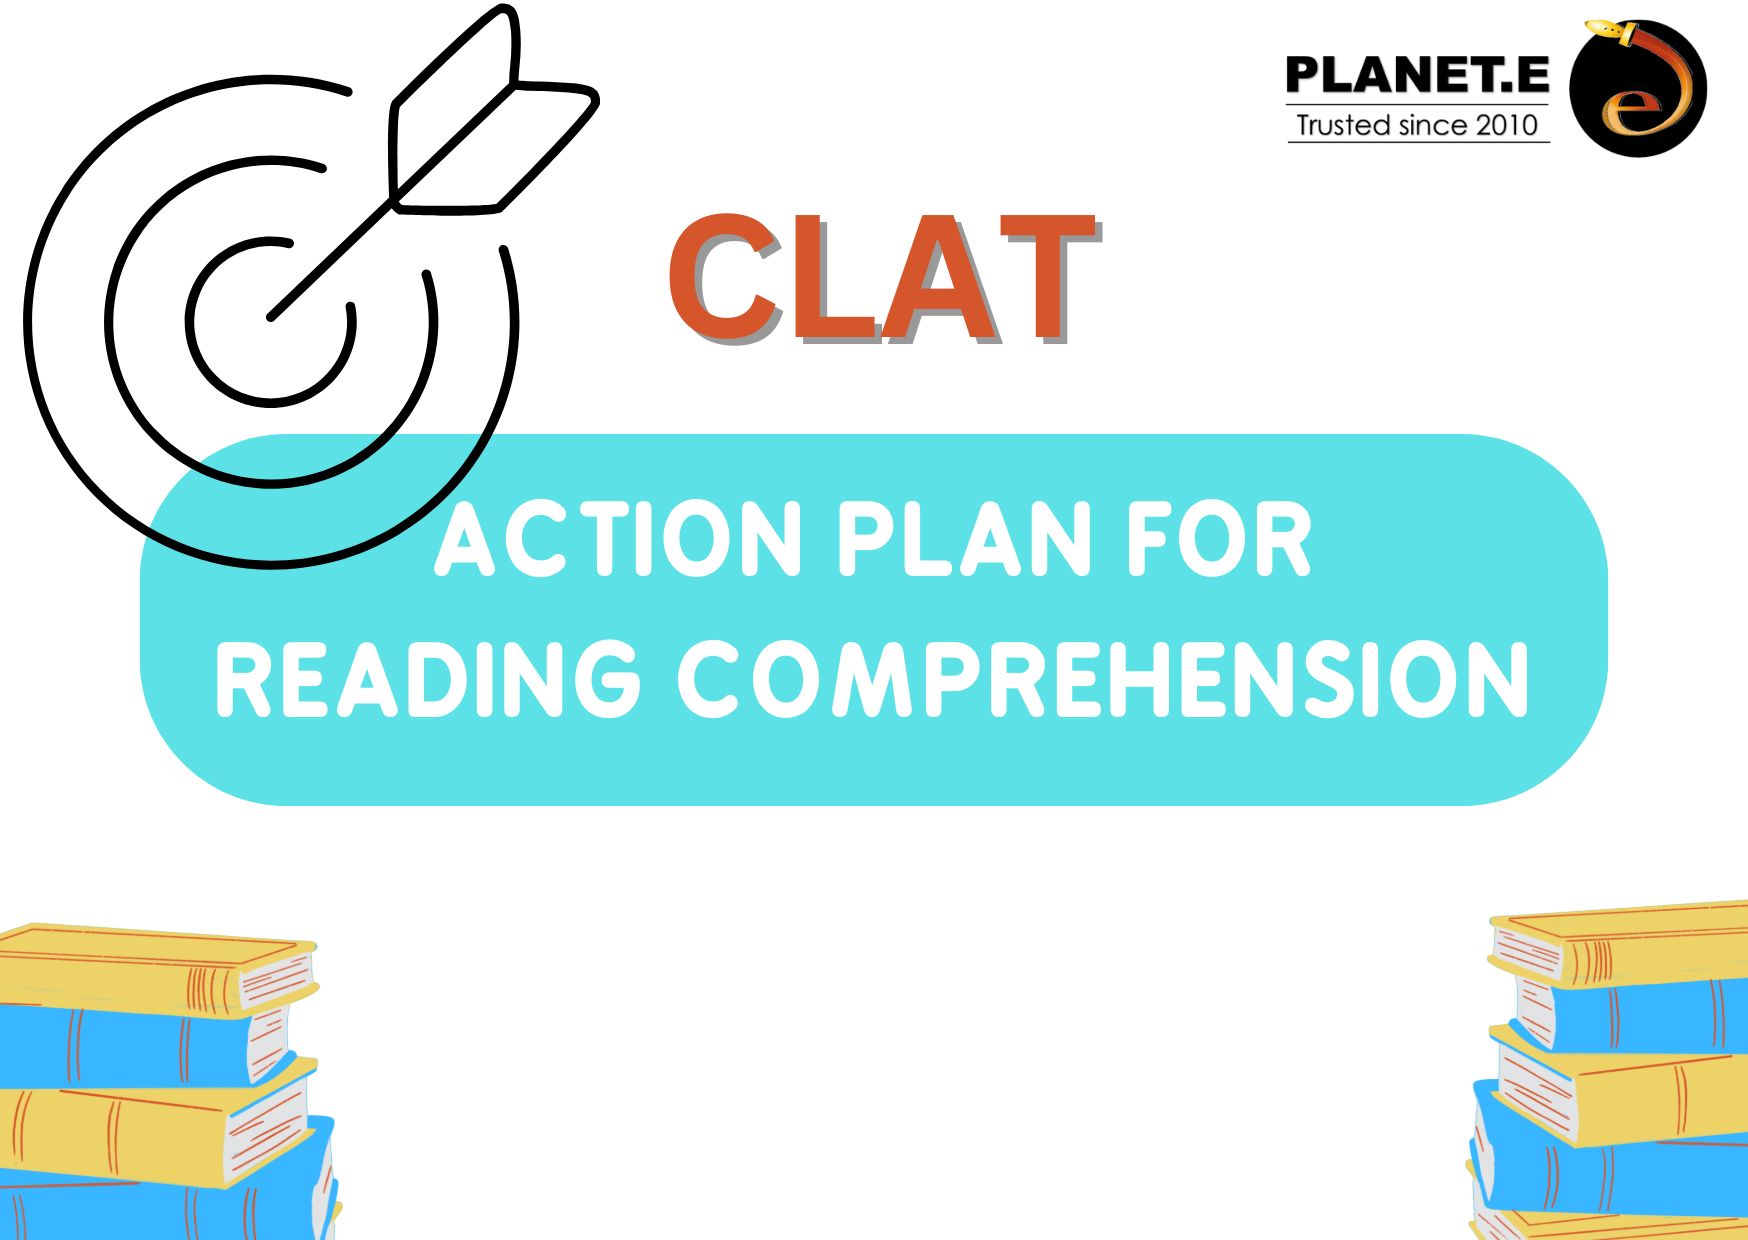 clat classes near me, reading comprehension for law entrance exams